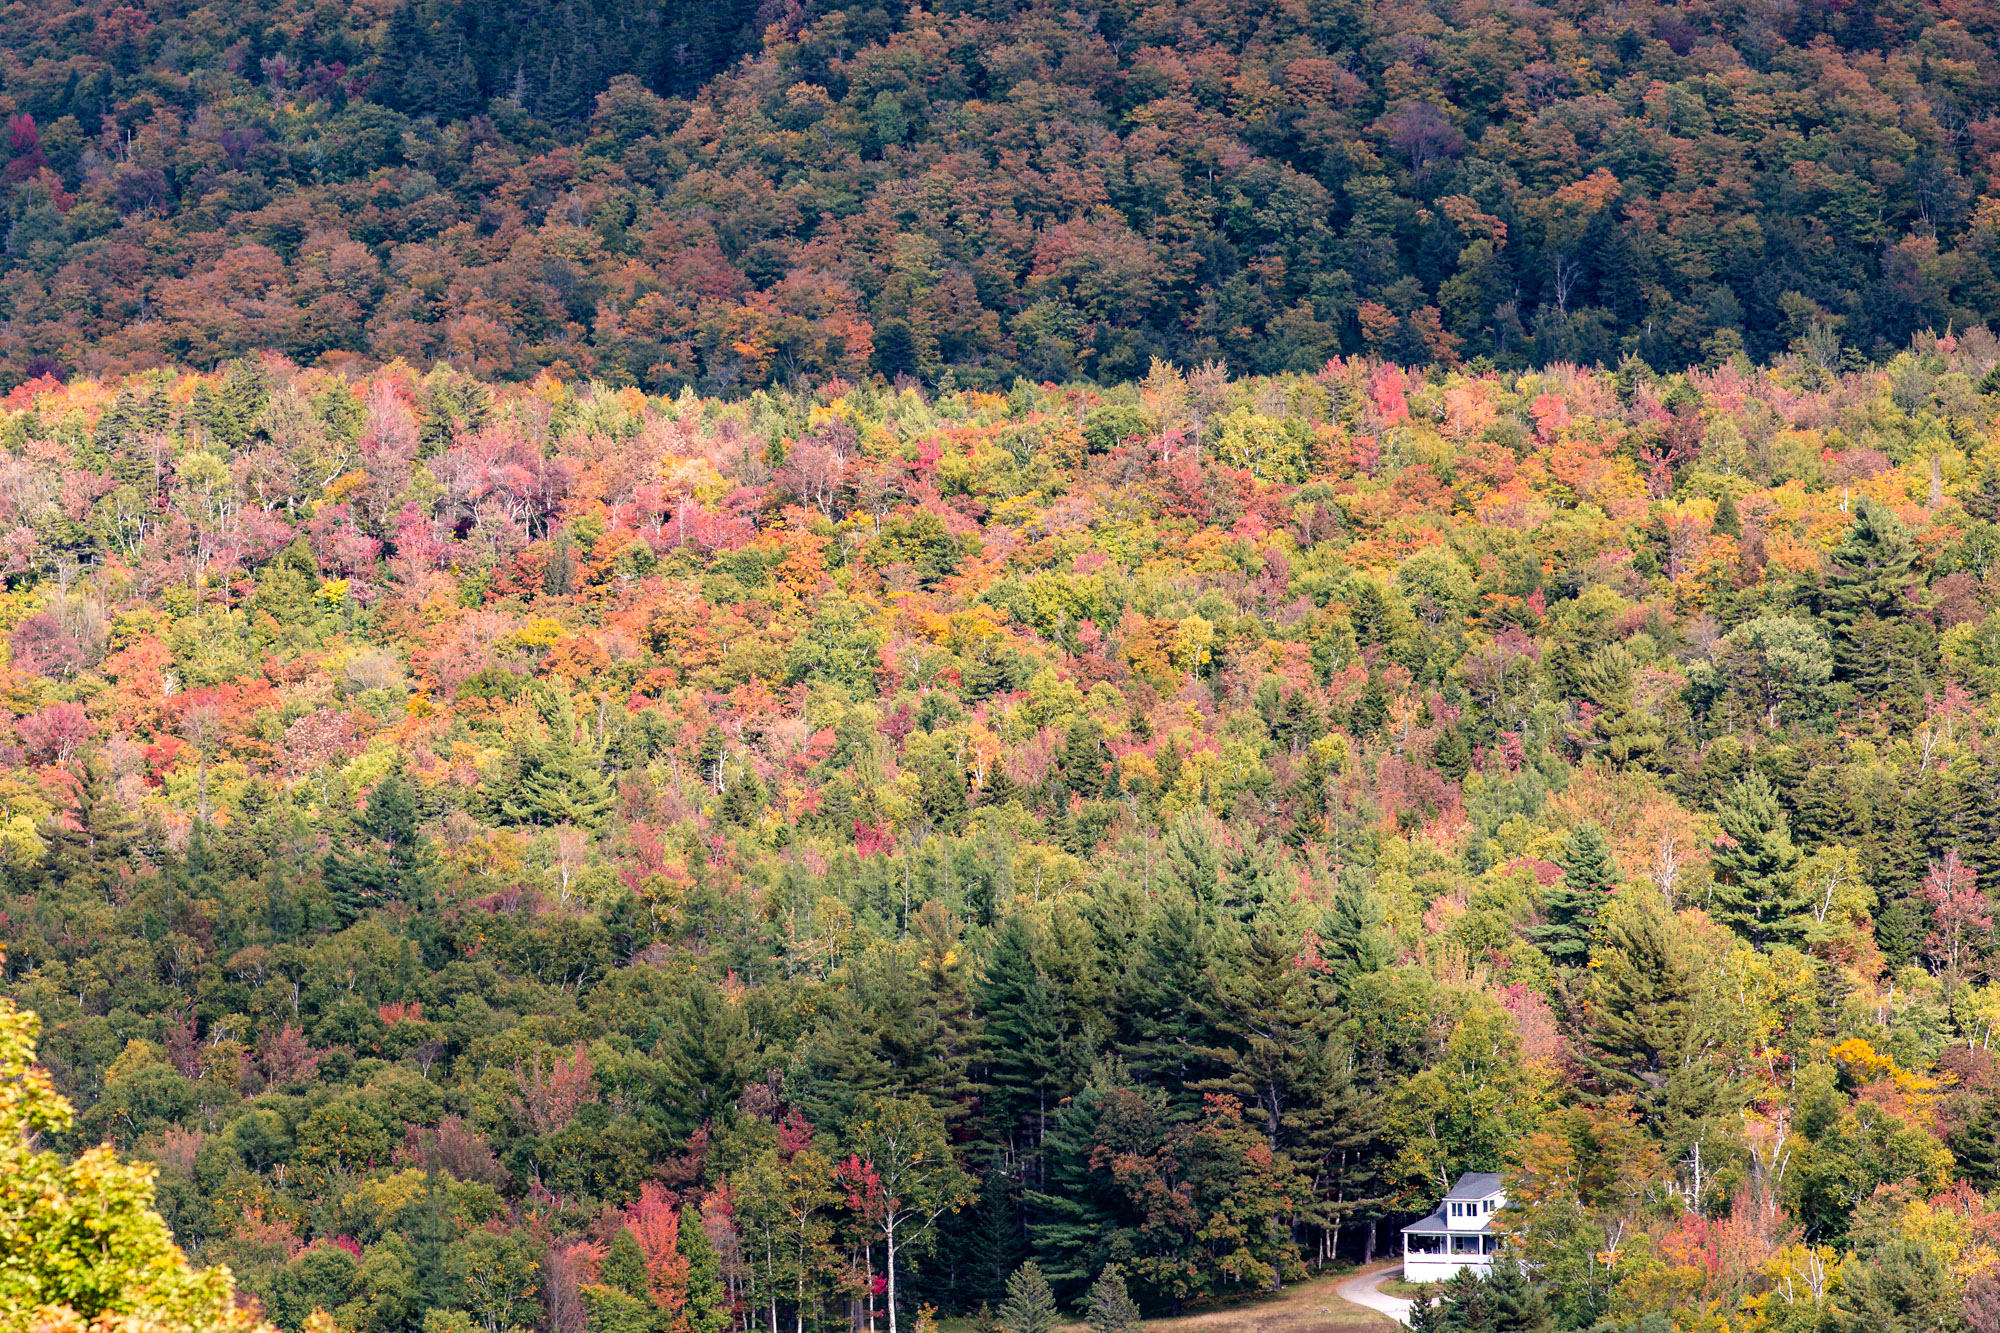 A solitary house among the fall colors